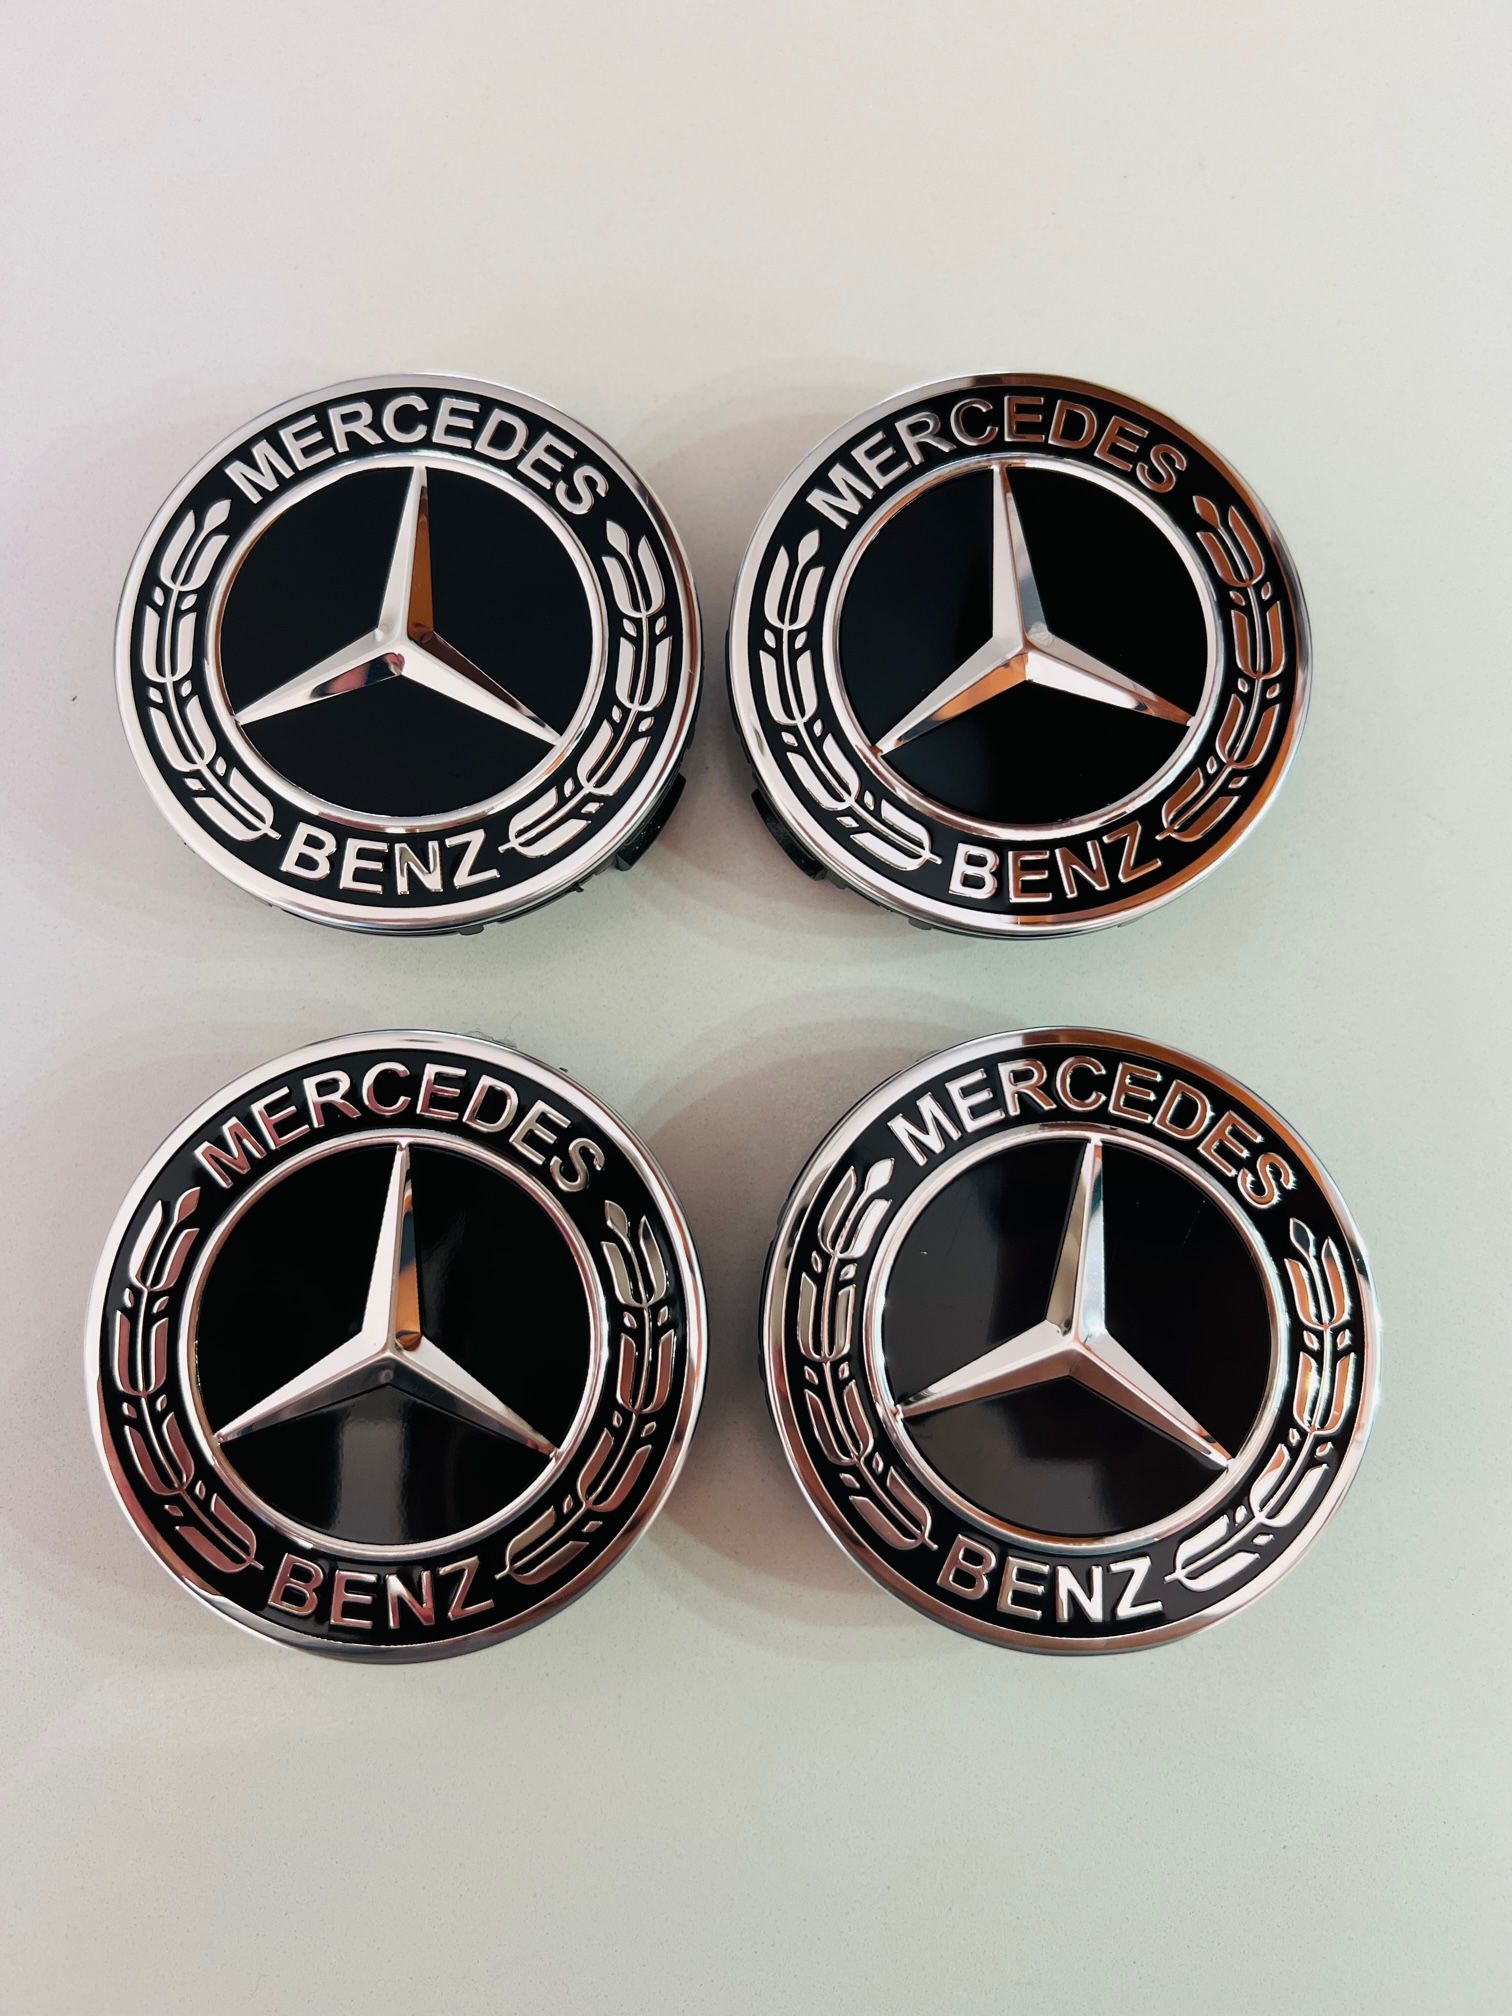 4 Wheel Center Caps 75mm Classic Black Fits Mercedes Benz MB AMG Fast  Shipping!